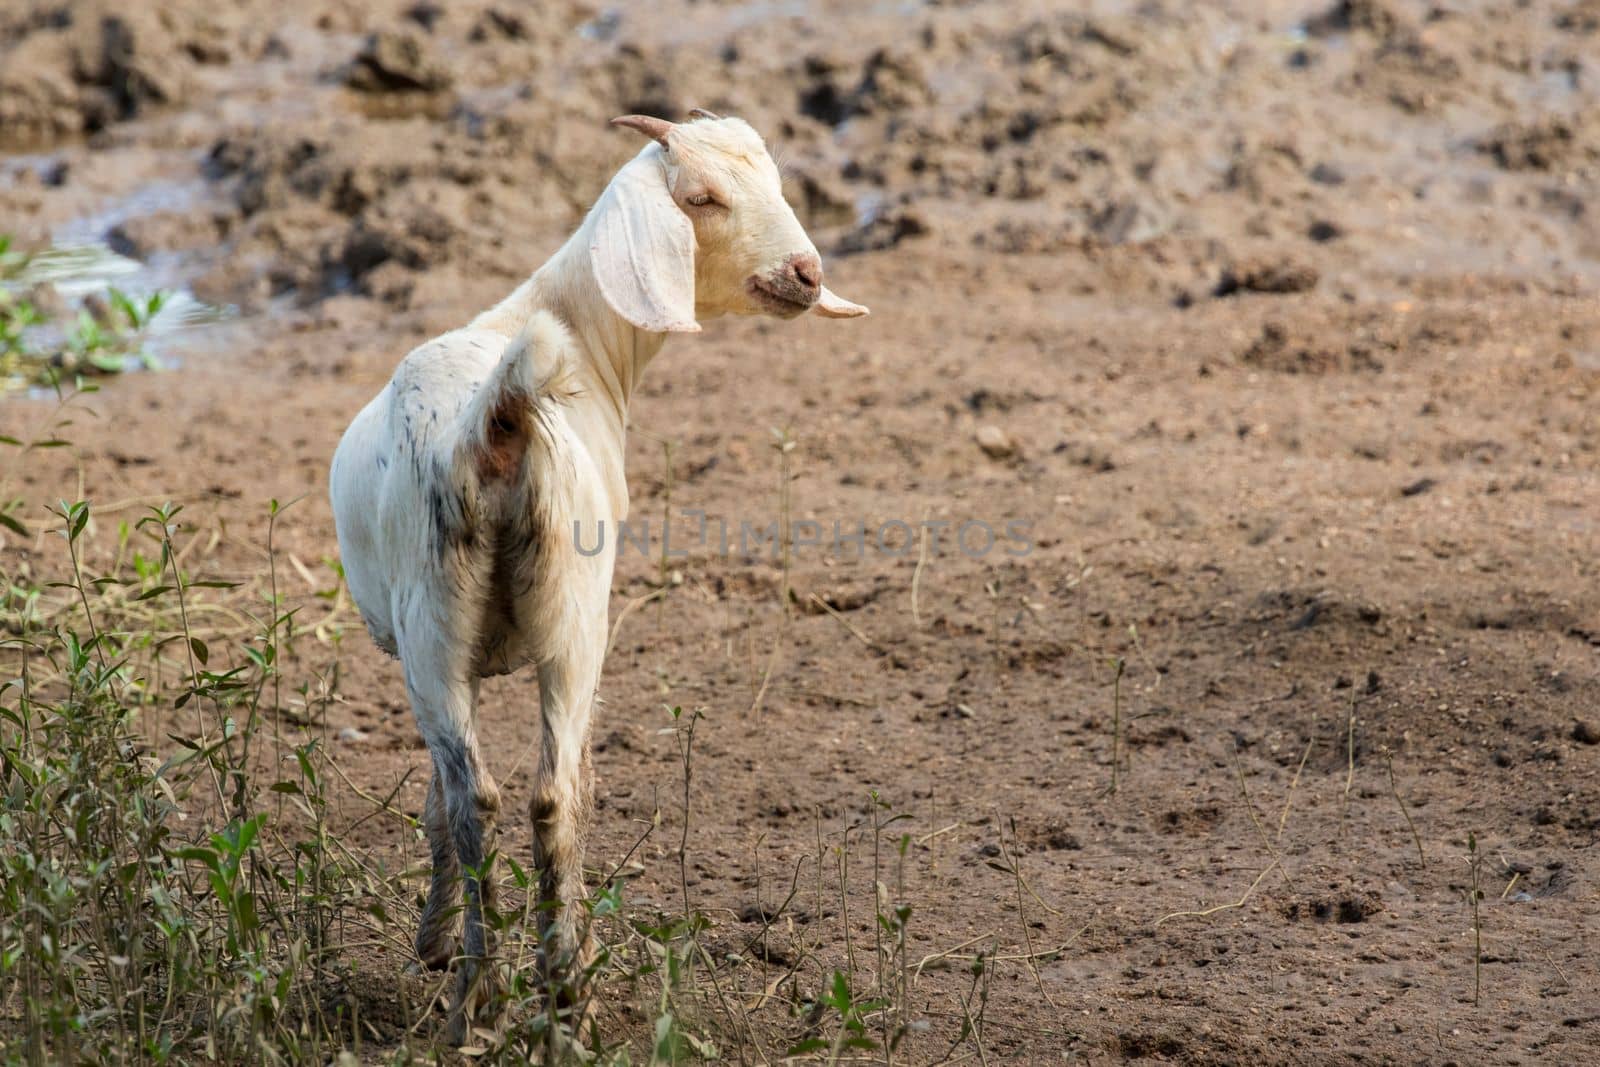 Image of white goat on the natural background. Farm Animal.